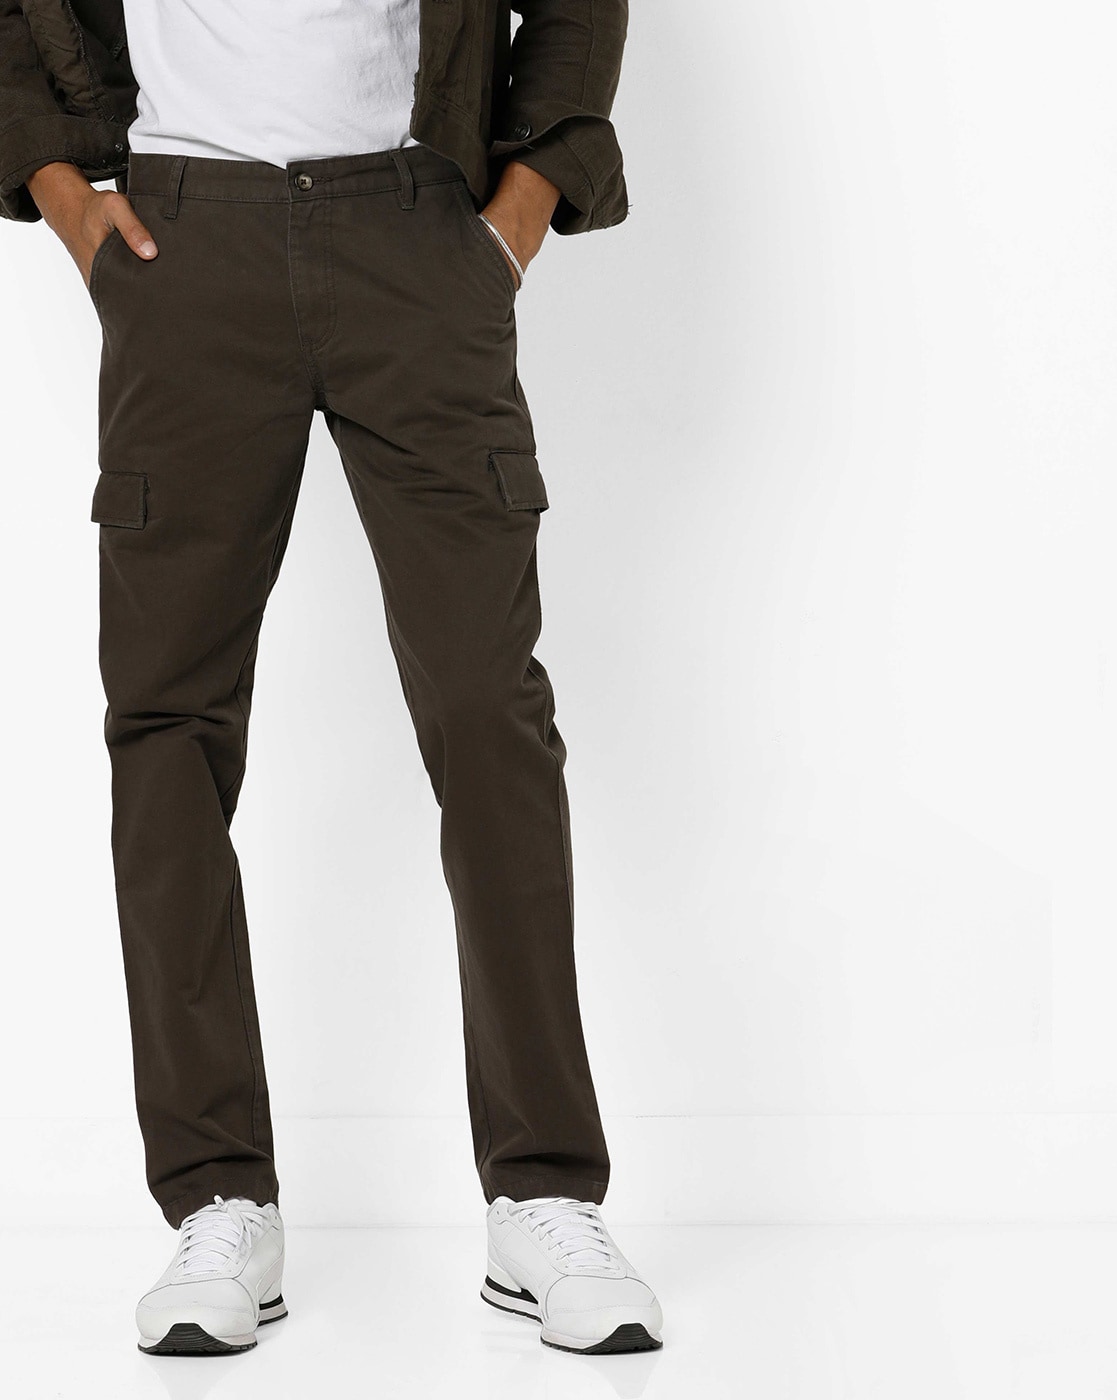 Buy Olive Green Trousers  Pants for Men by ProEarth Online  Ajiocom